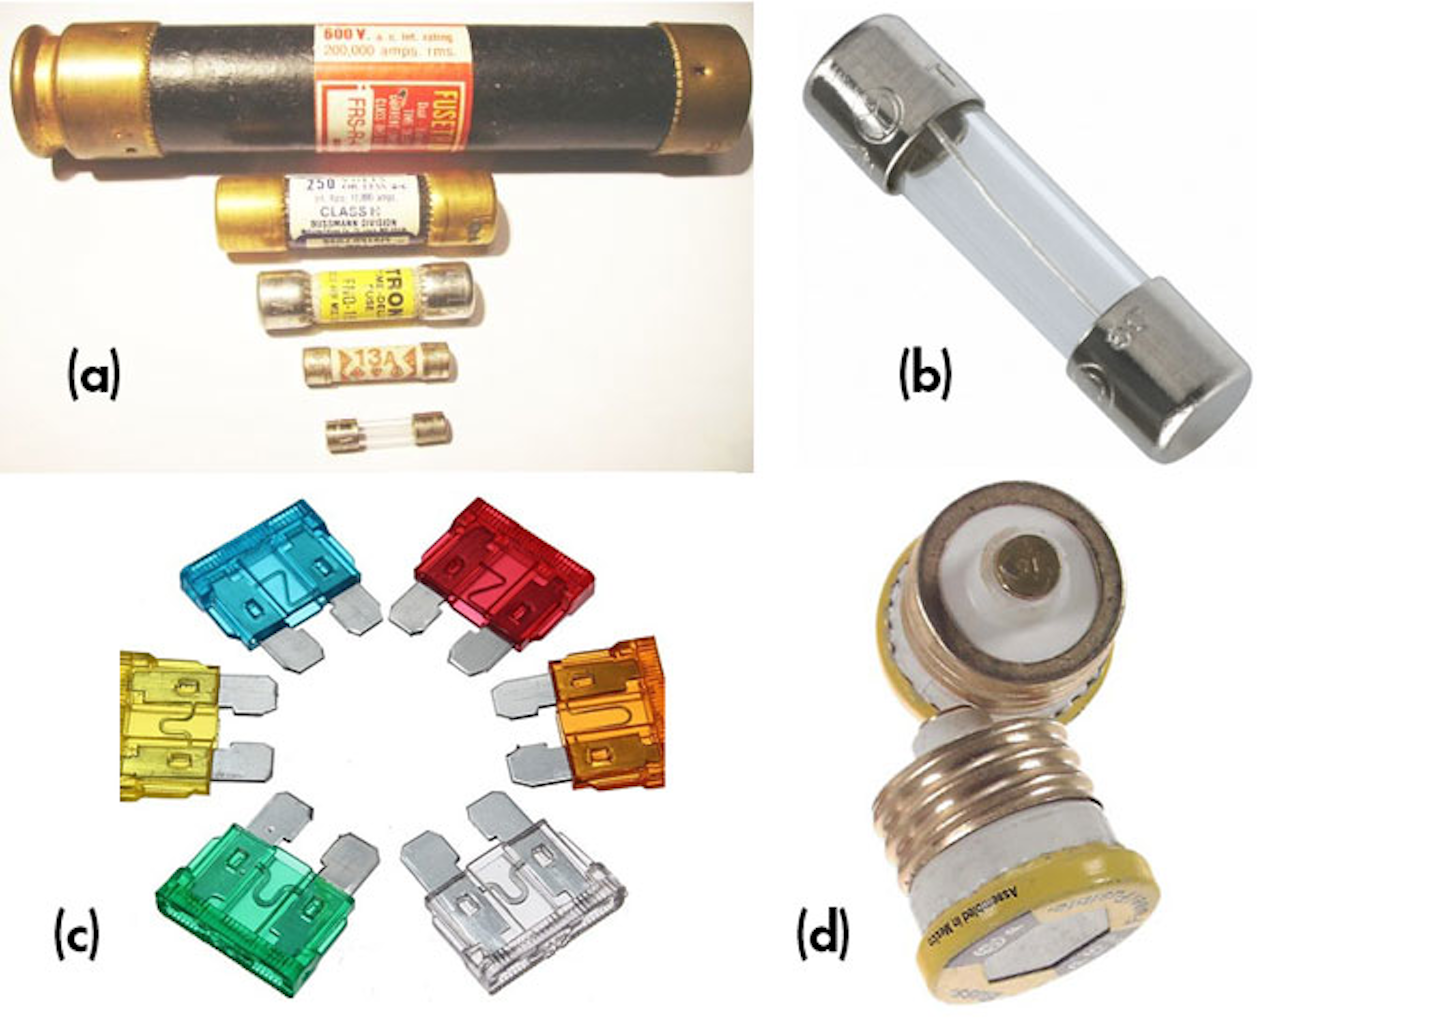 2. Fuses come in a wide range of form factors and current/voltage ratings (not to scale): Blade-type 15- and 20-A fuses commonly used for car circuits (12 V dc) (a); low-current “3AG” fuses for up to about 120 V ac (b), old-fashioned “S” and “T”-type screw-in fuses rated to 20 and 30 A used in 120-V ac power lines) (c); and larger fuses (50 A and higher) are often housed in cylinders called cartridges (d). (Image sources: Sunstore/UK; Source: Electrical Wholesaler/Ireland; RONA Langdon Hardware Ltd/Canada; and reviseOmatic.org)